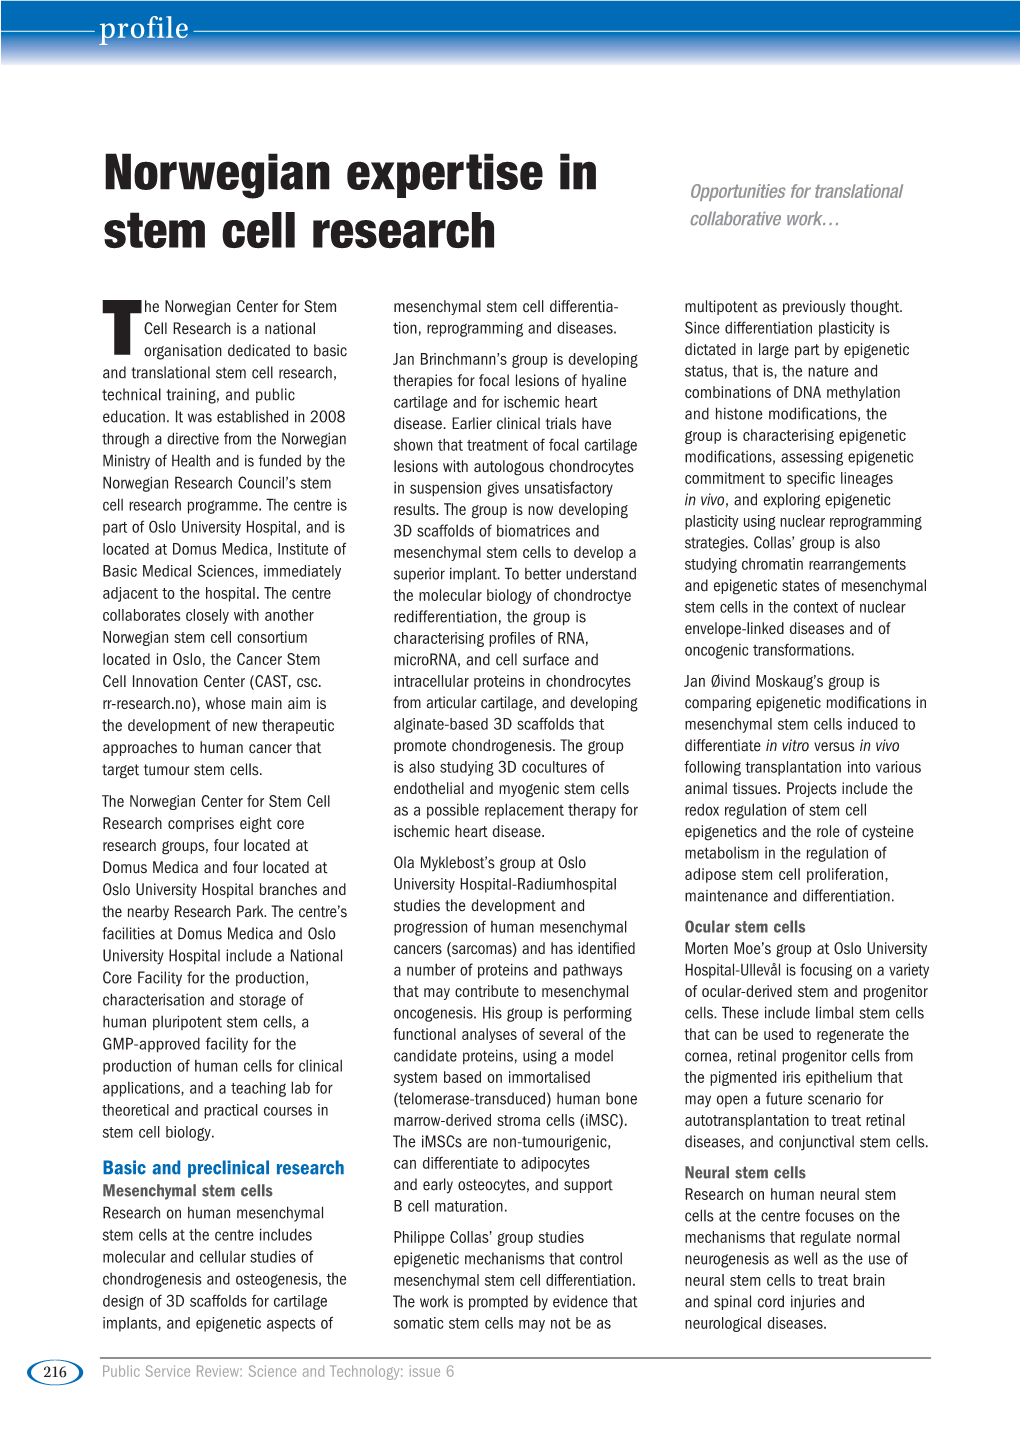 Norwegian Expertise in Stem Cell Research